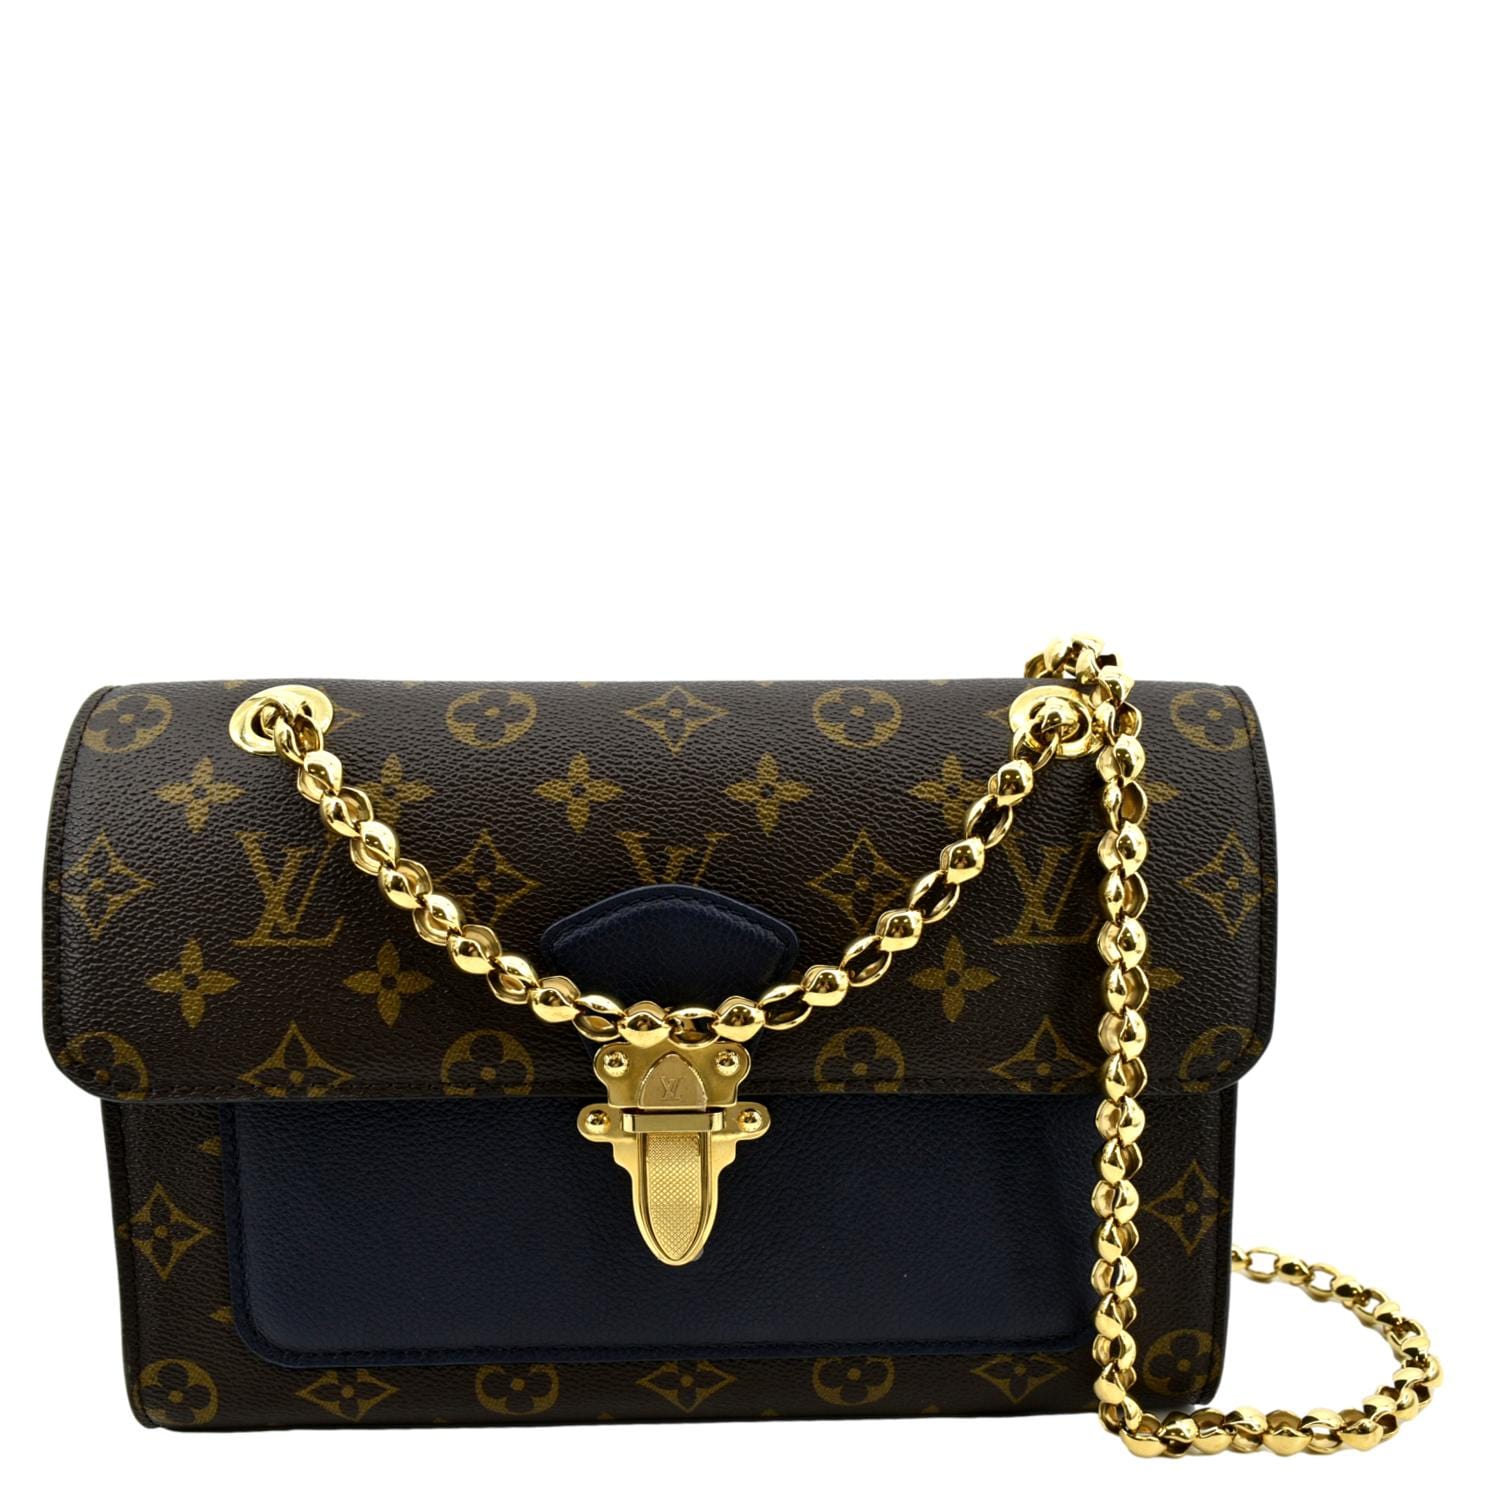 Louis Vuitton Pre-owned Women's Fabric Clutch Bag - Blue - One Size